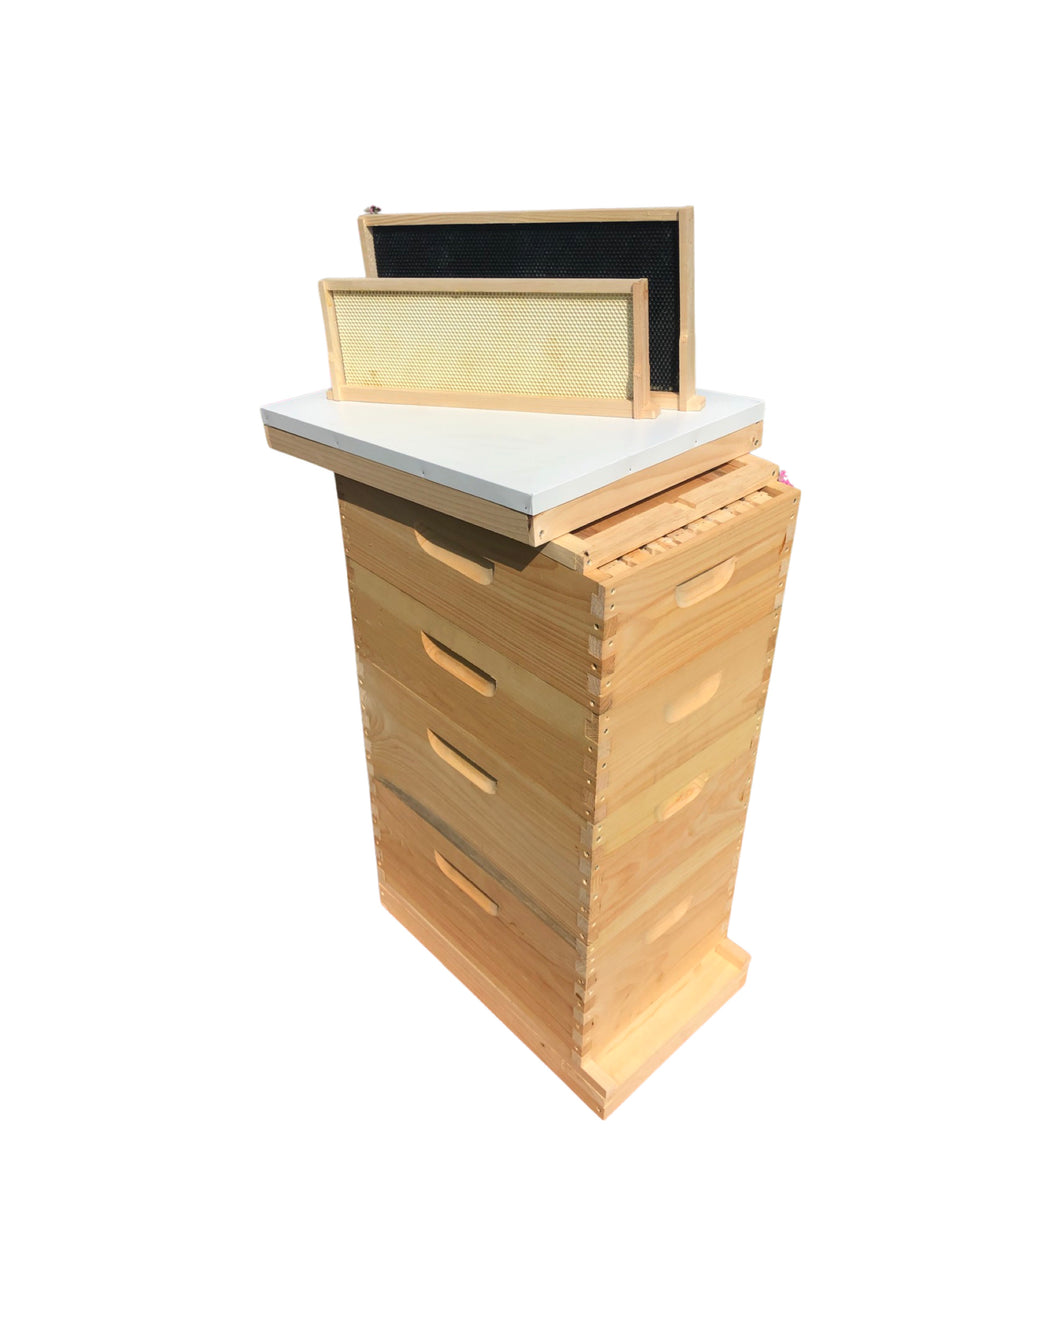 Bee Hive 2 Deep 2 Medium Complete BeeHive kit w/Frames & Foundations (Un-Assembled) Langstroth